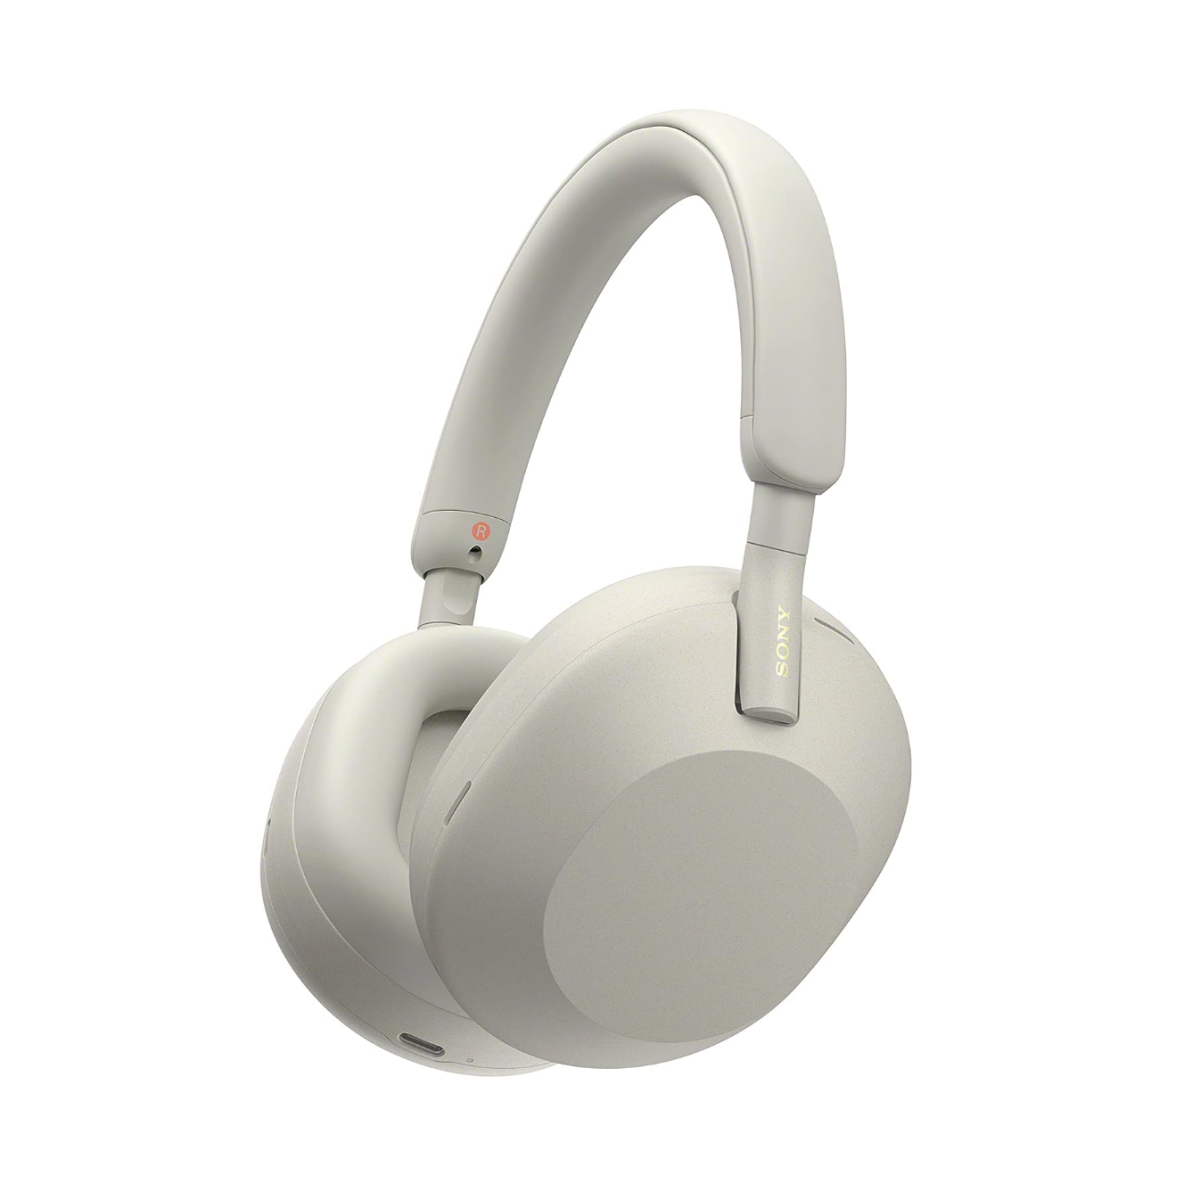 A pair of white Sony WH-1000XM5 Noise-Canceling Headphones